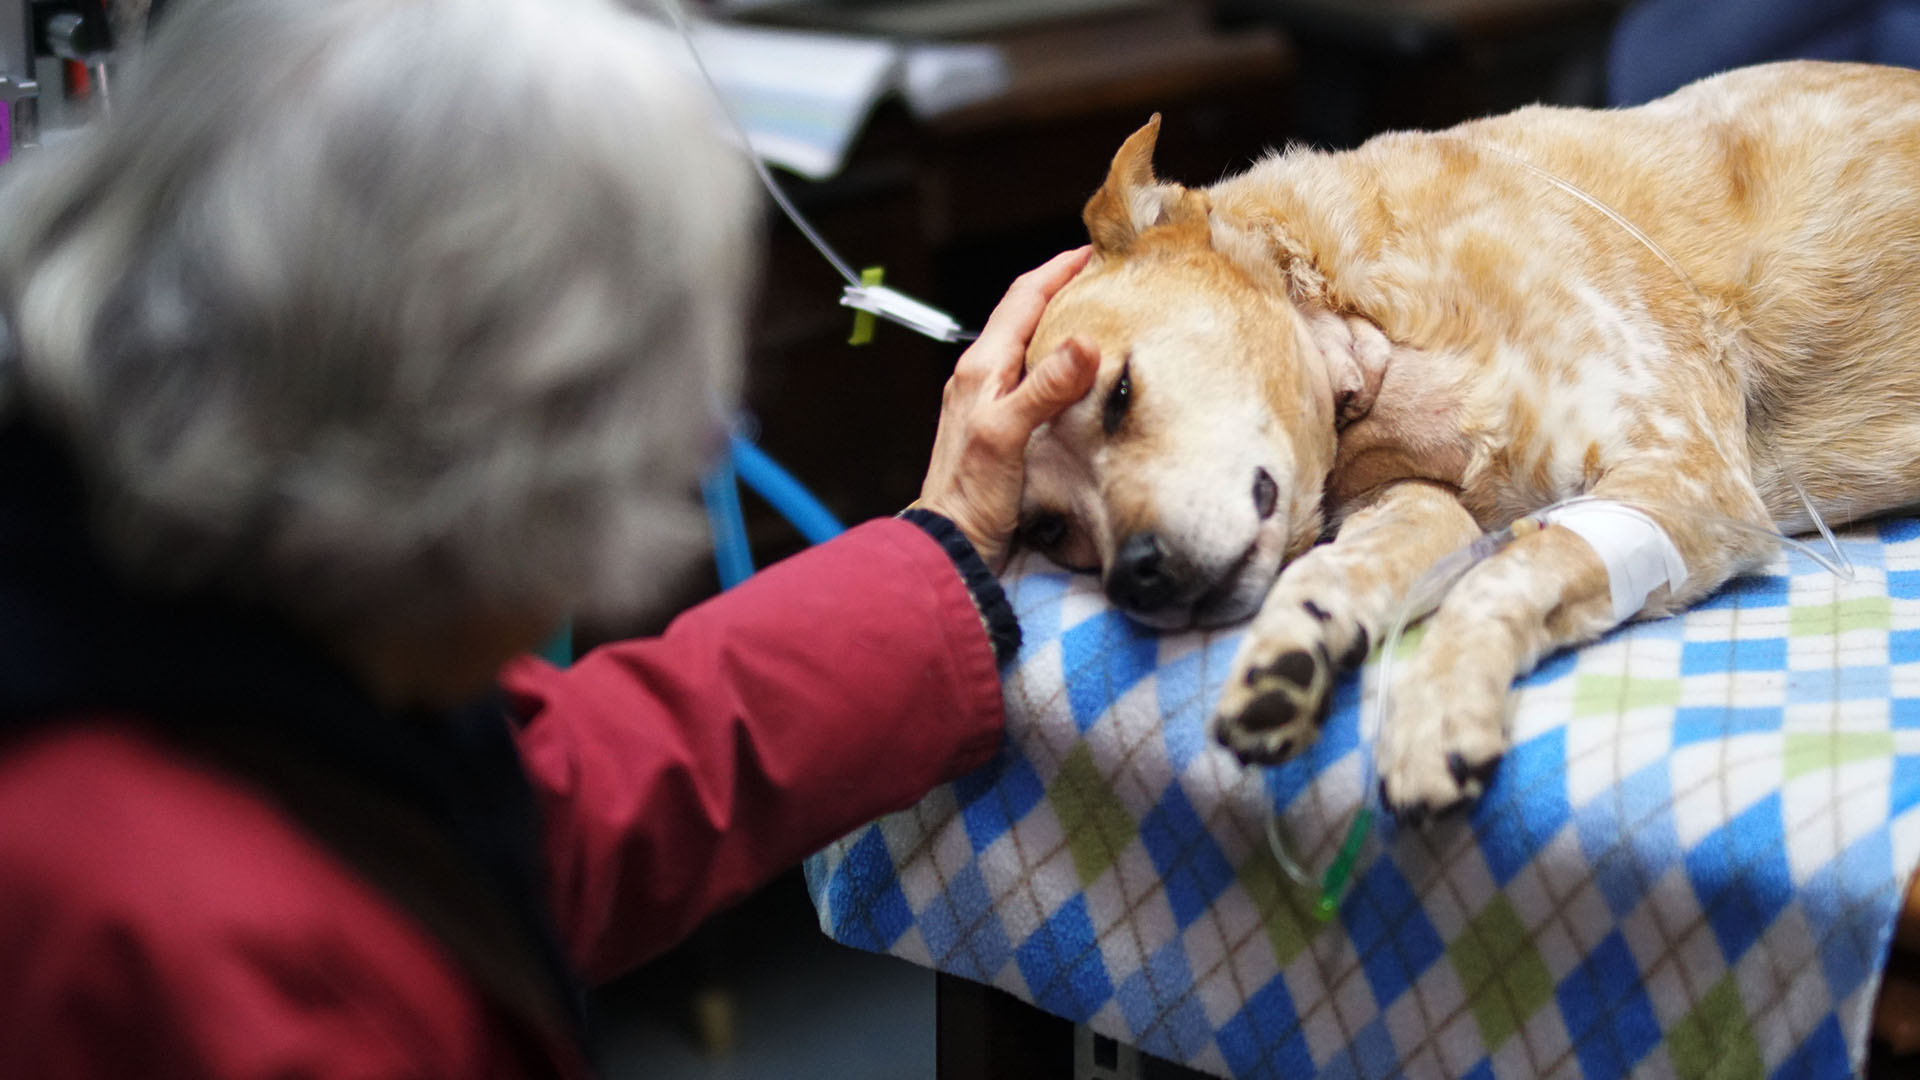 Suki the dog is given some TLC from her owner, Evelyn Vignola. This is from Dr. Oakley, Yukon Vet. [Photo of the day - July 2023]